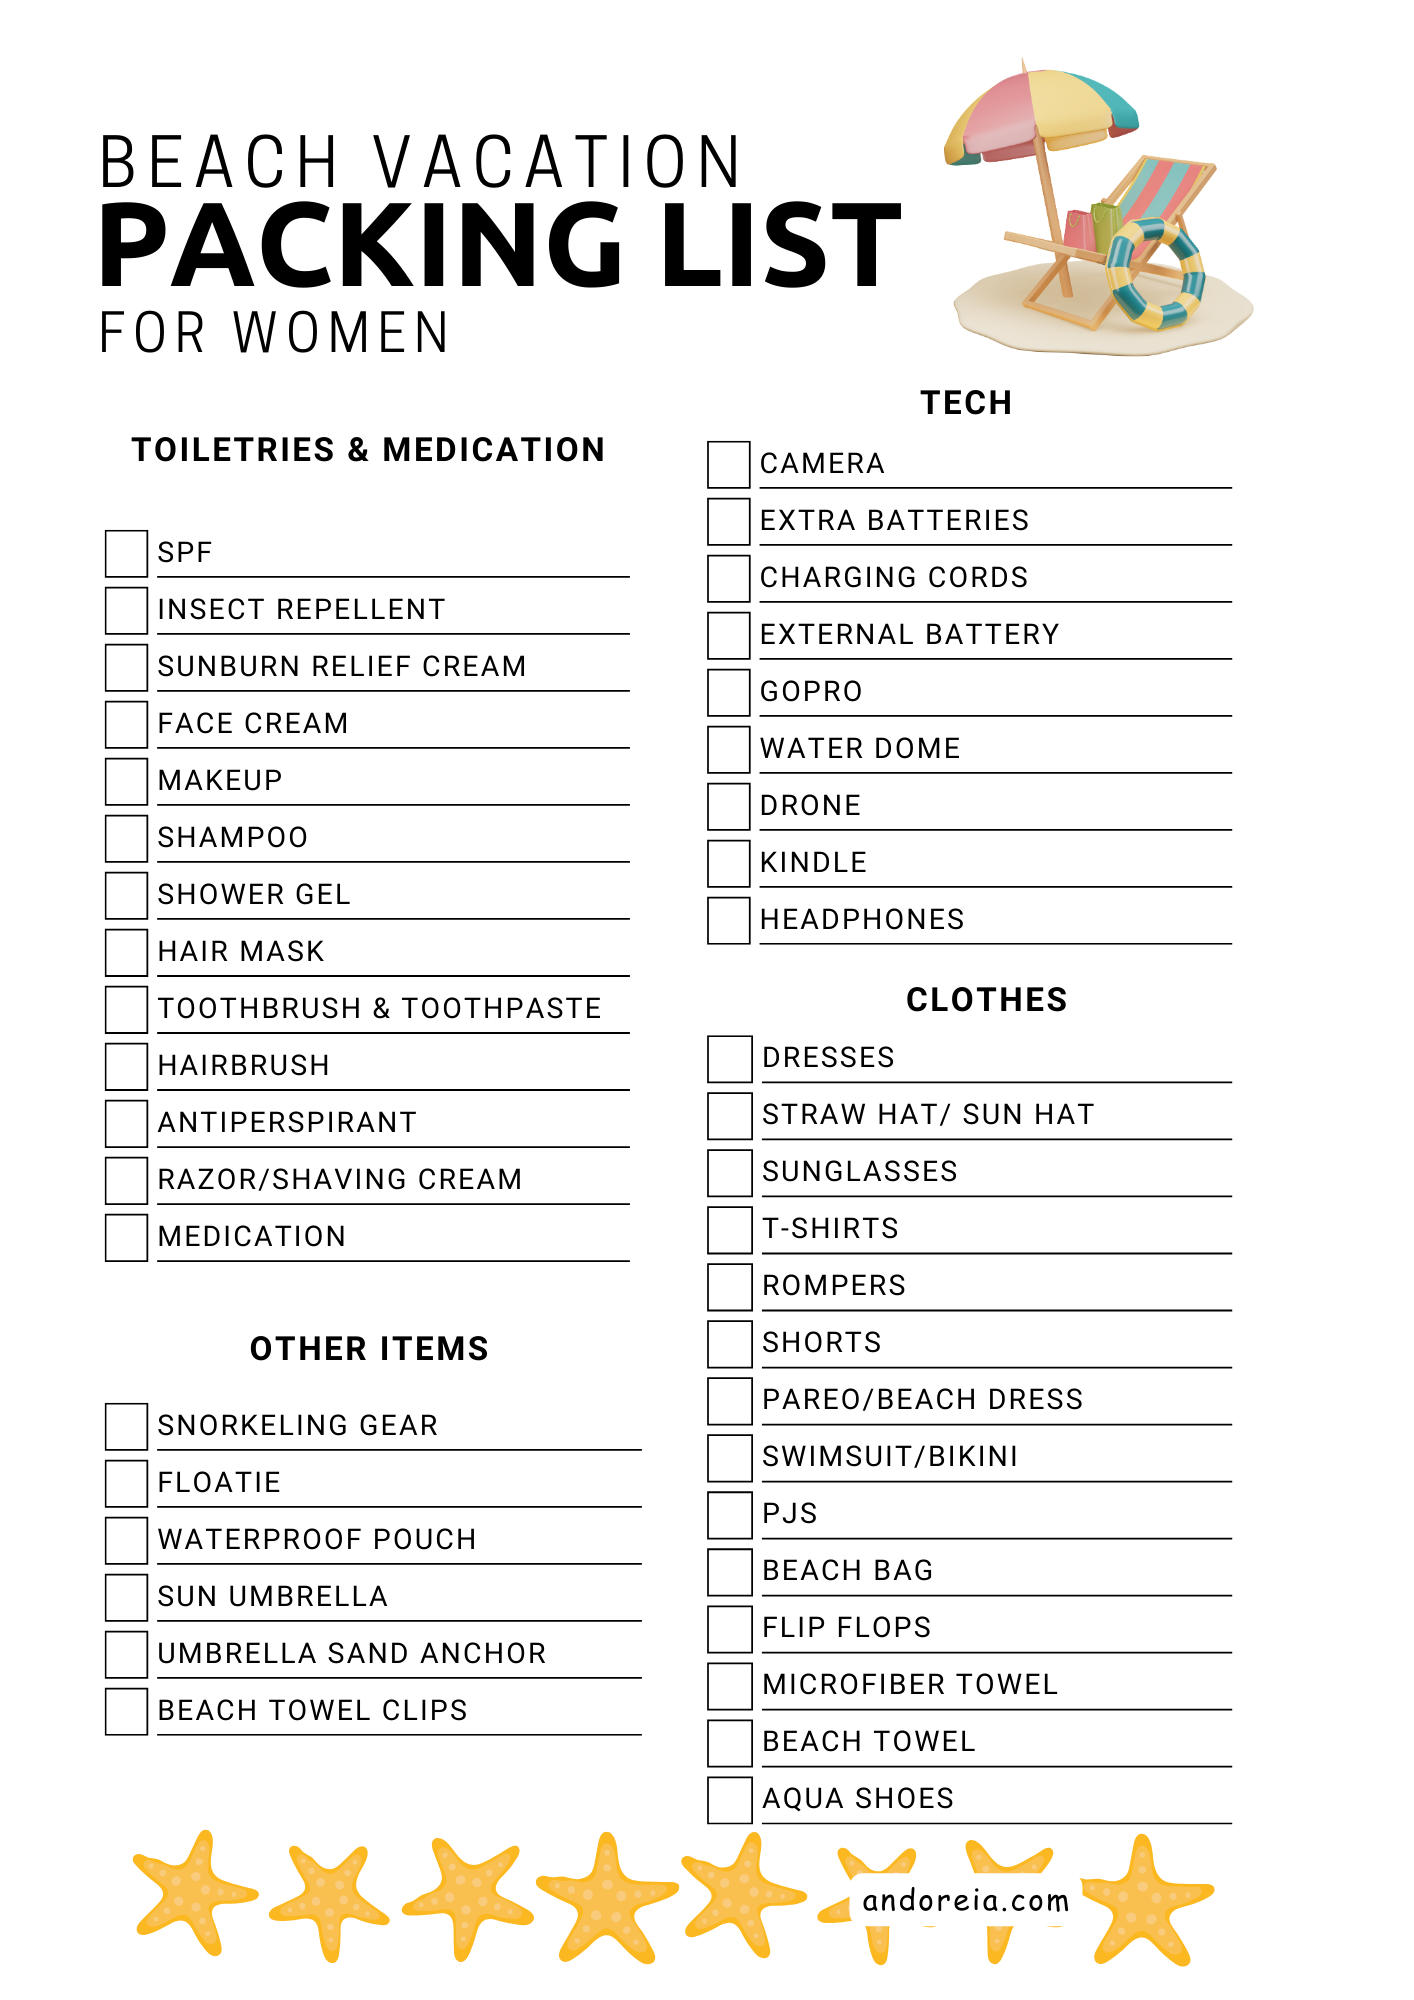 Beach vacation Packing List for Women (Downloadable PNG)